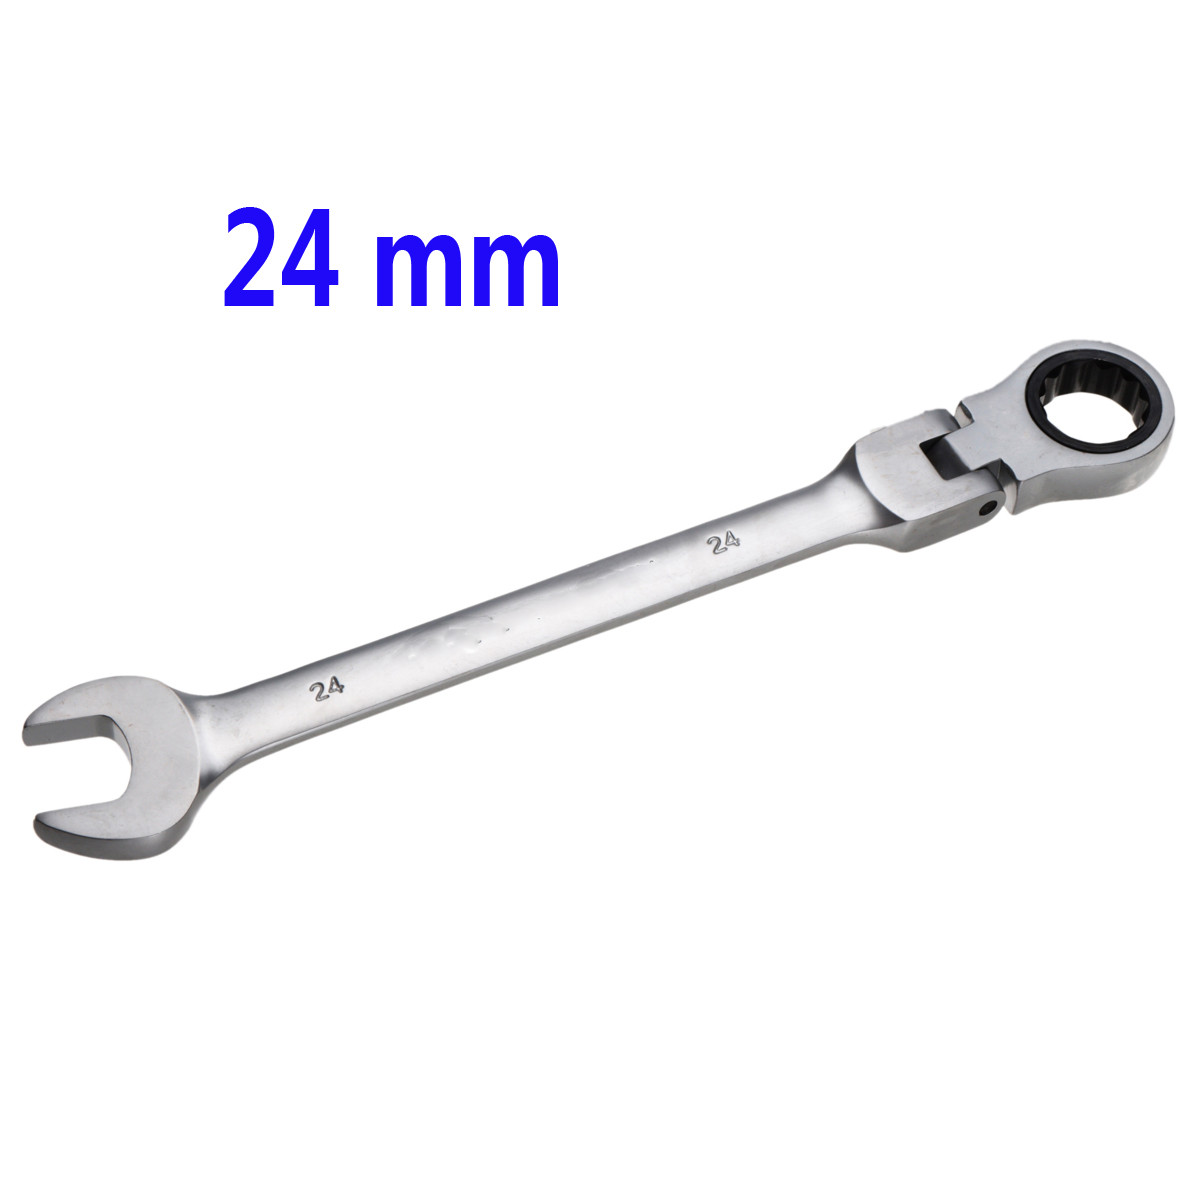 24-mm-CR-V-Steel-Flexible-Head-Ratchet-Wrench-Metric-Spanner-Open-End-amp-Ring-Wrenches-Tool-979829